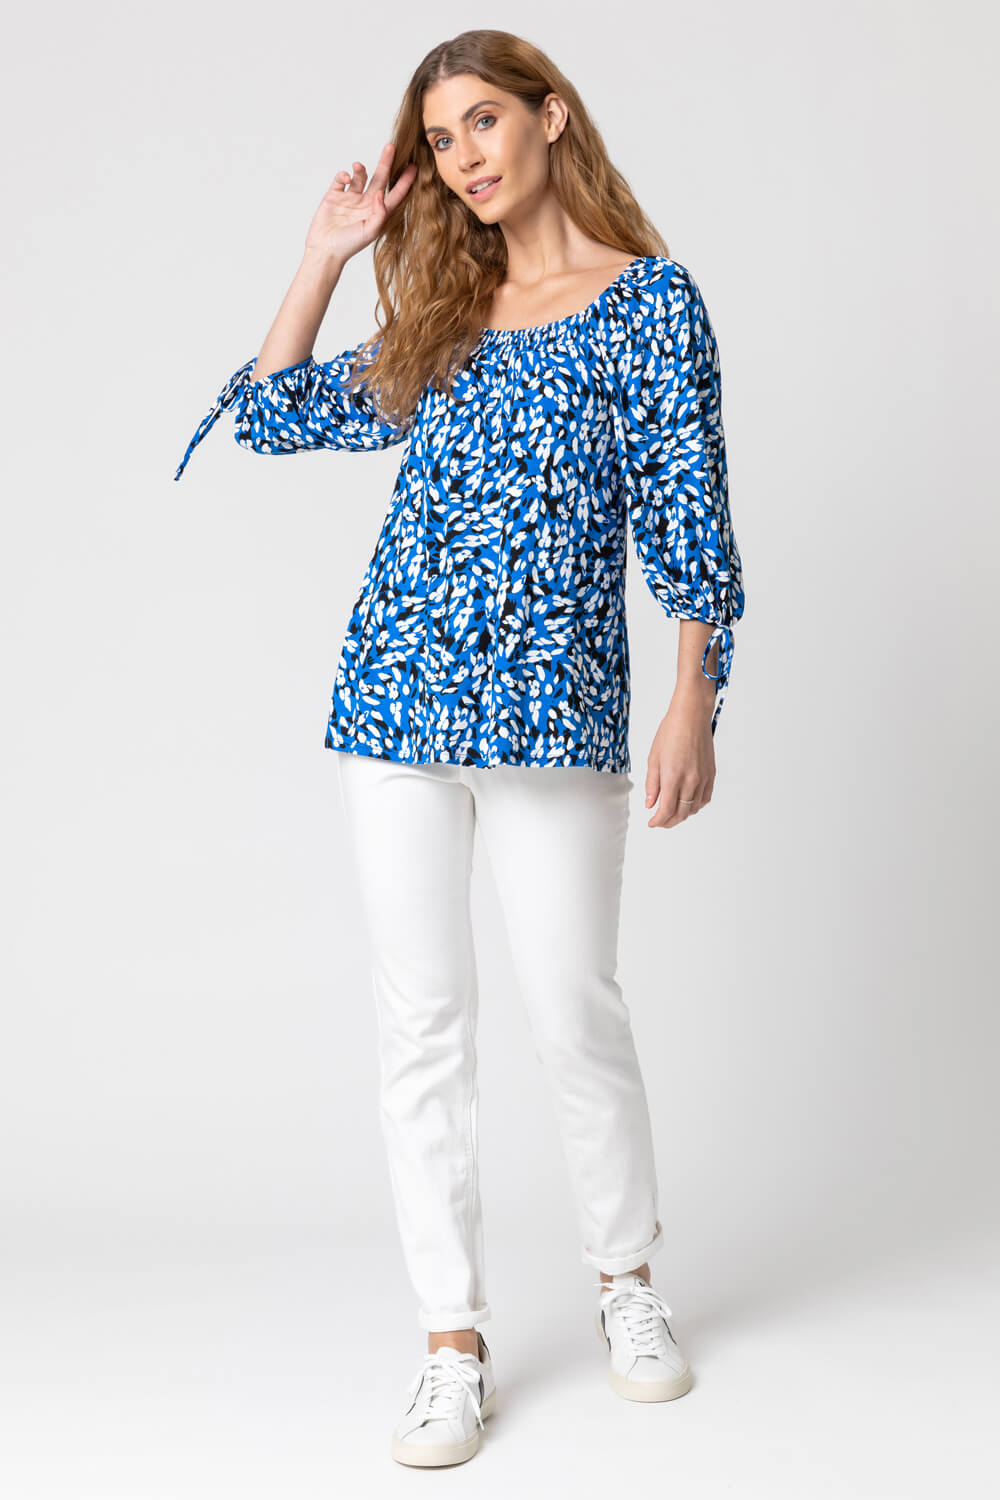 Royal Blue Abstract Spot Print Square Neck Top, Image 3 of 4